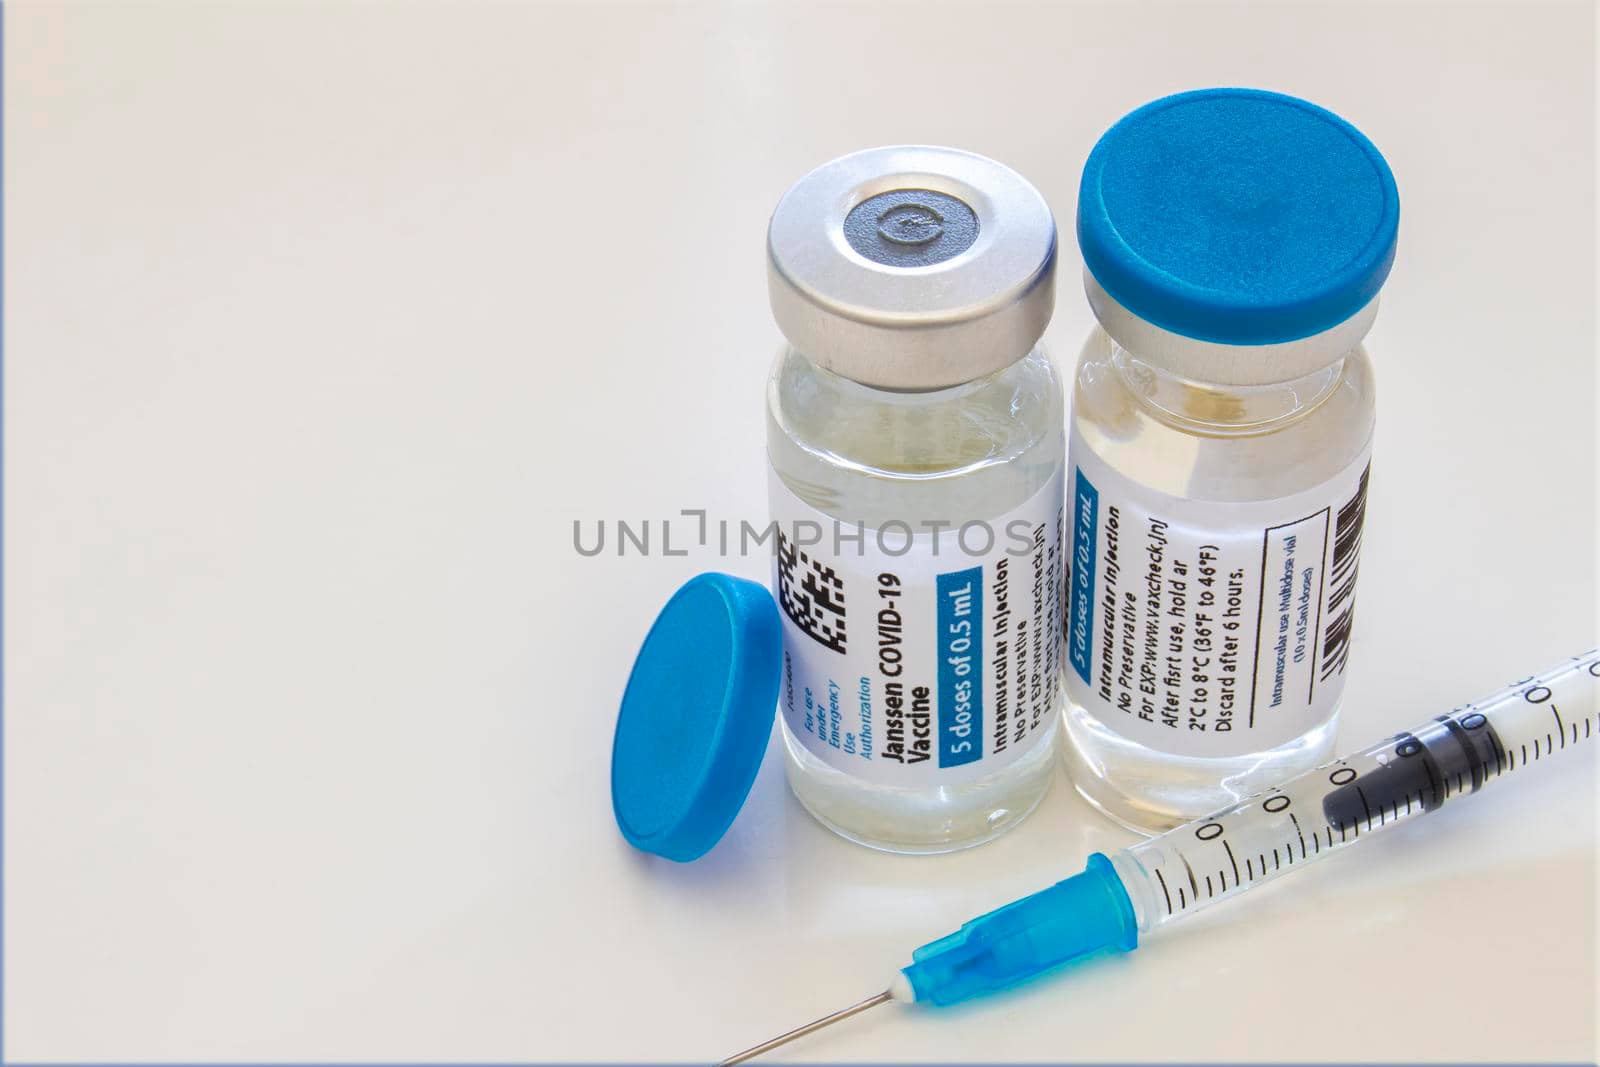 Calgary, Alberta, Canada. April 21, 2021. A couple of Janssen Covid-19 vaccine made by Johnson and Johnson. Vaccine vials bottles and an injection syringe on a clear table. by oasisamuel